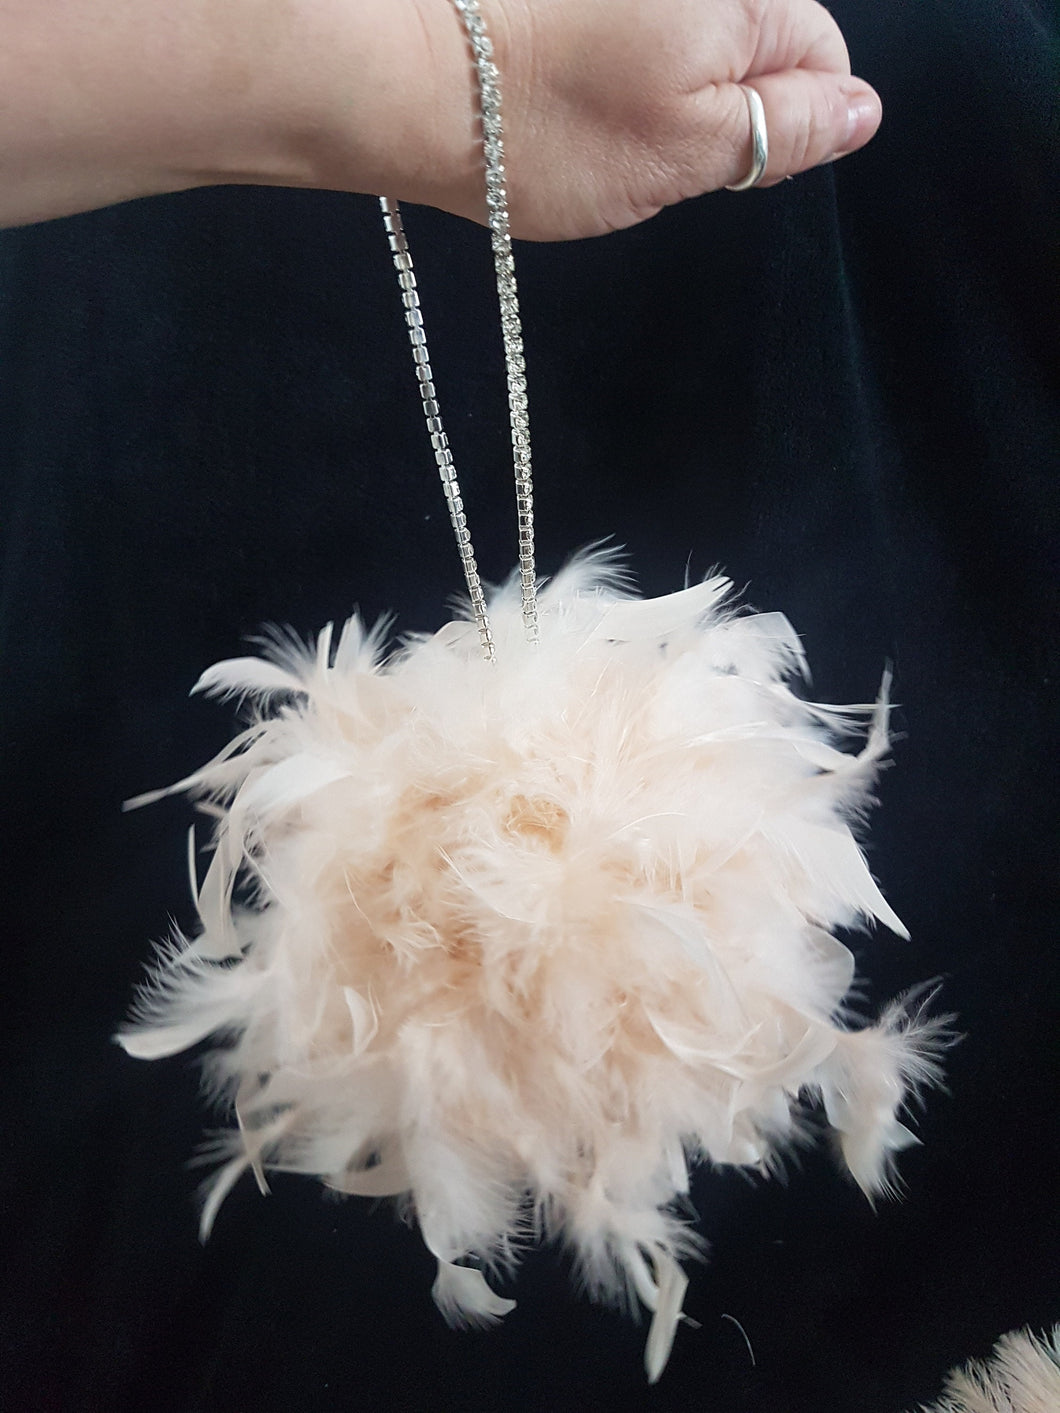 Feather Pomander With Rhinestone chain handle  Feather Kissing Ball. Feather Flower Girl Bouquet.   Artificial Wedding accessory ANY COLOUR